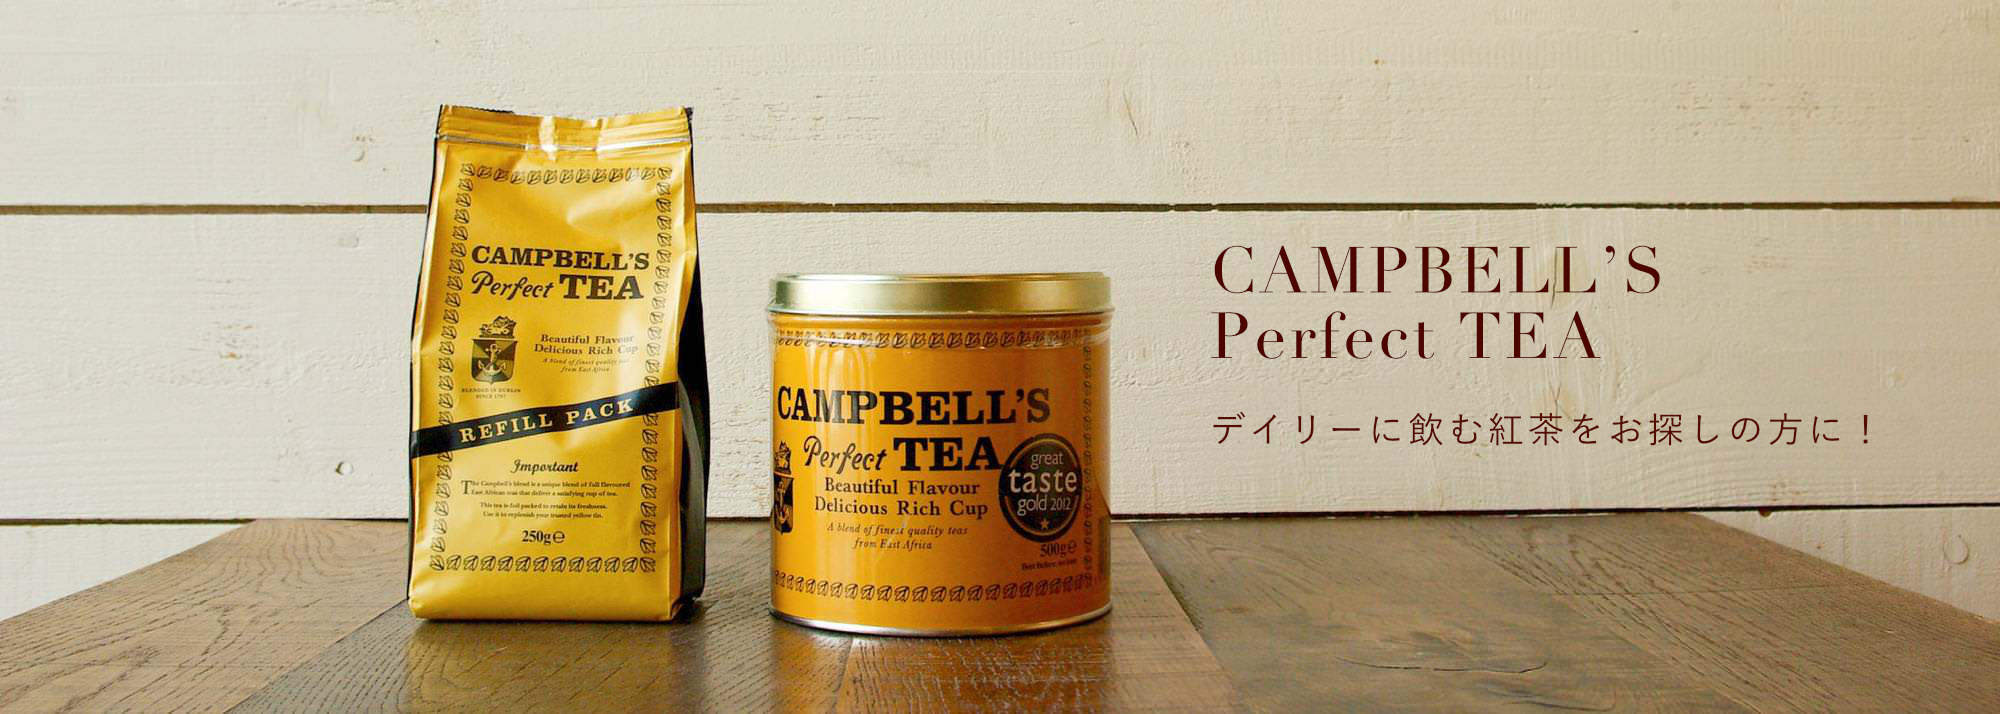 campbell's perfect tea